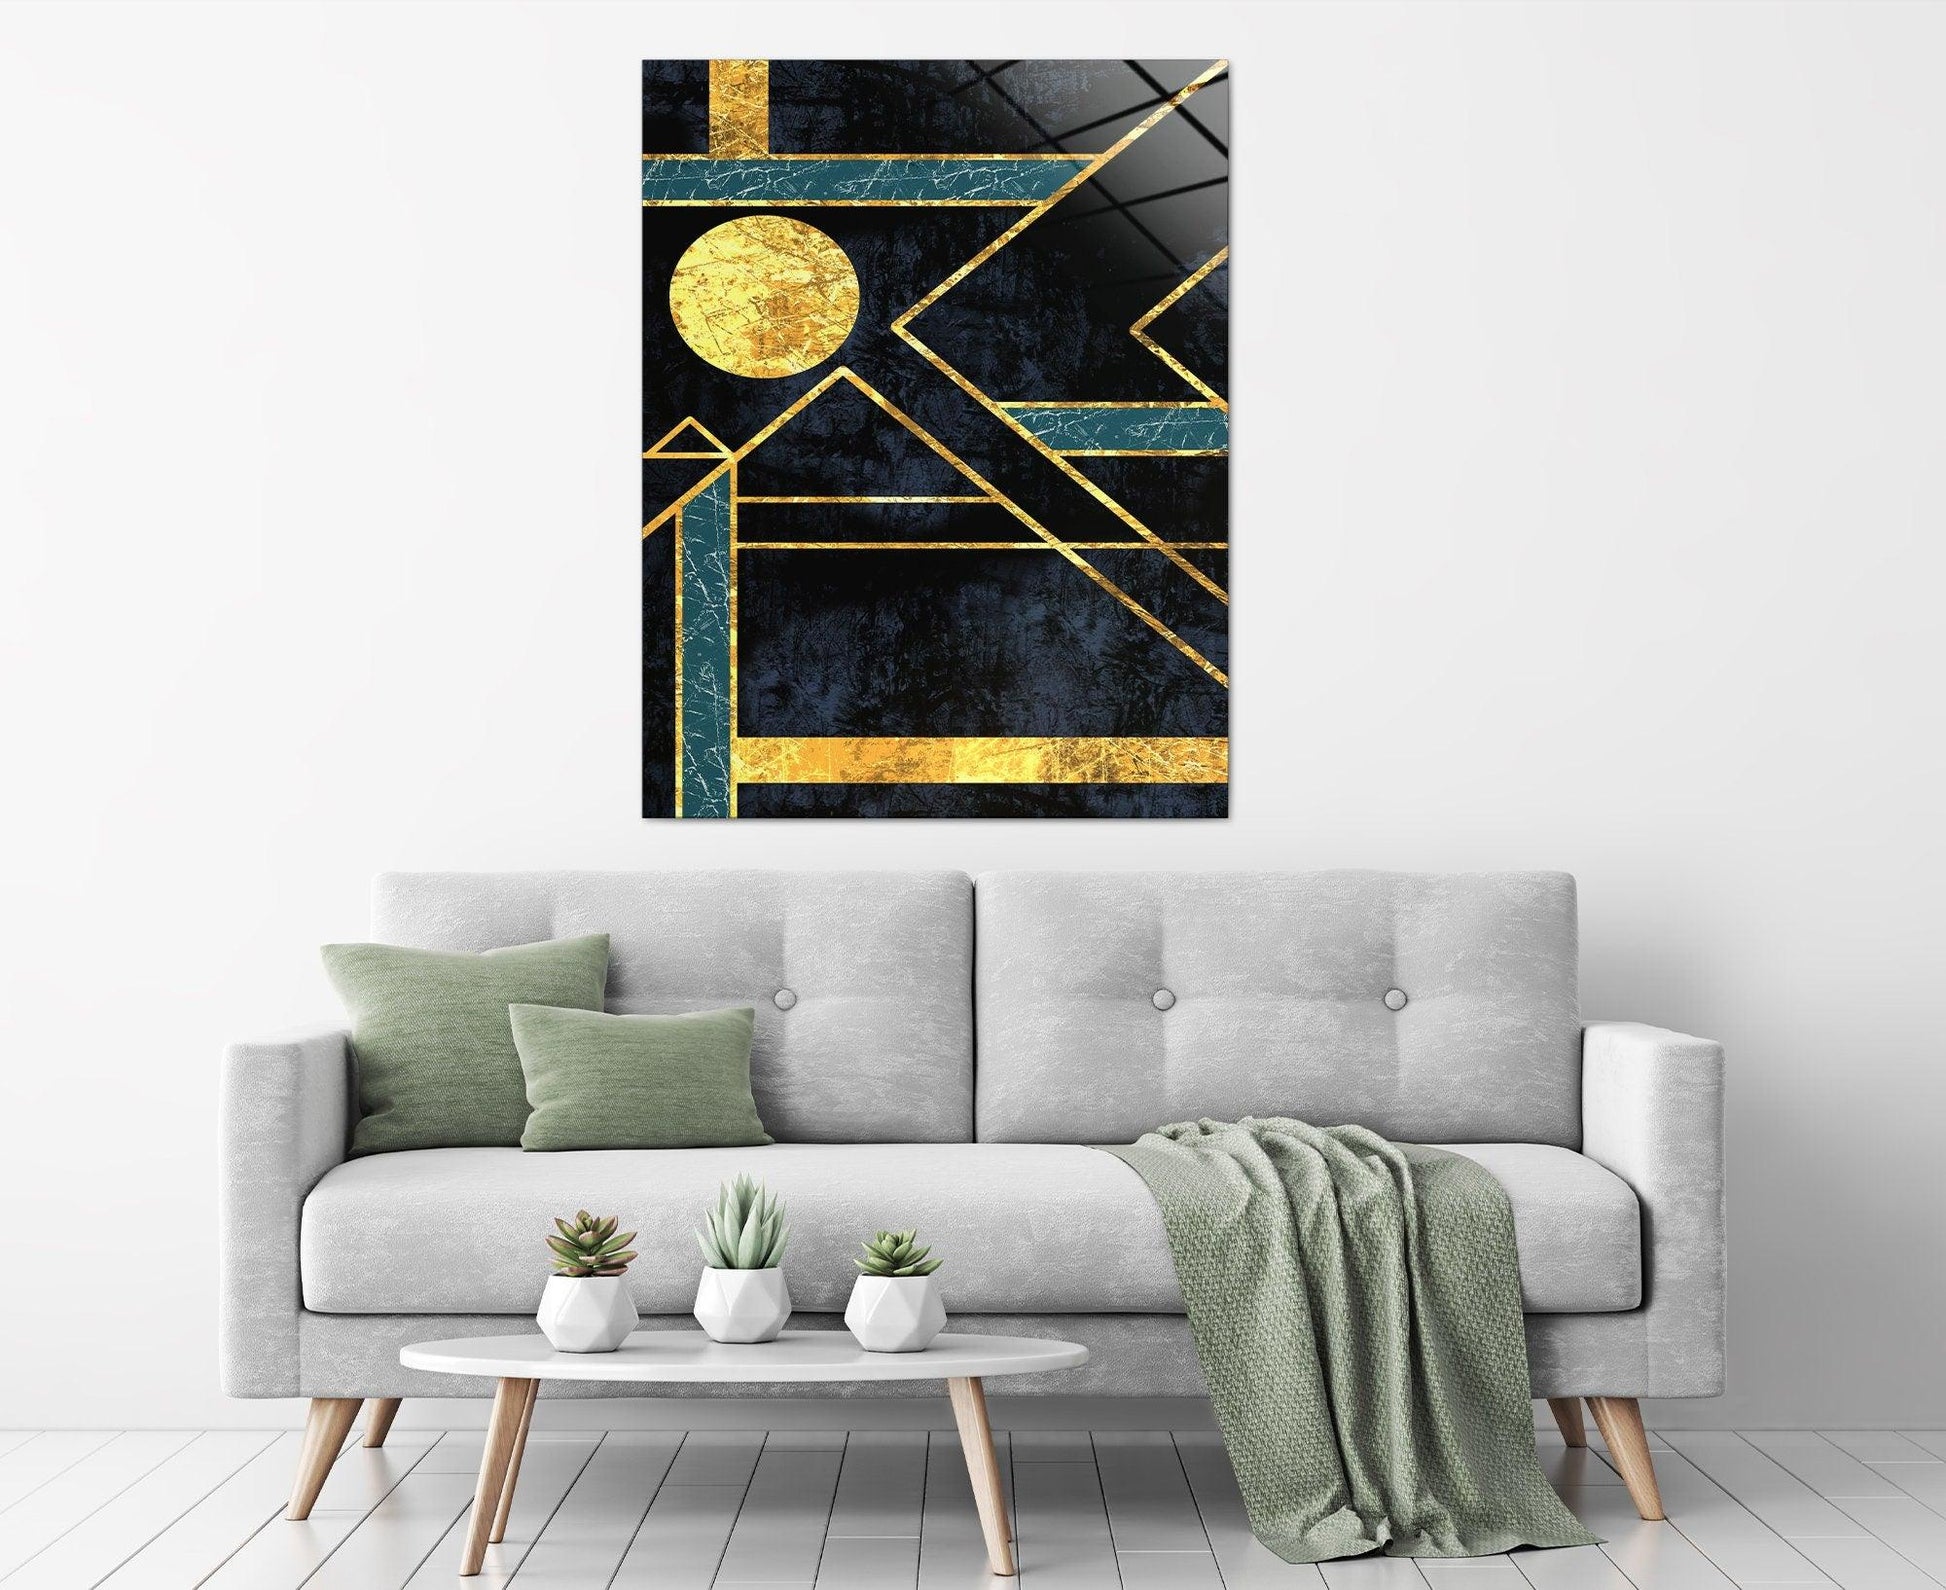 Emerald Green And Gold canvas wall art| Abstract Art · Emerald Green Decor · Gold Wall Art, Minimalist Wall Art, circle wall art, circle art - TrendiArt